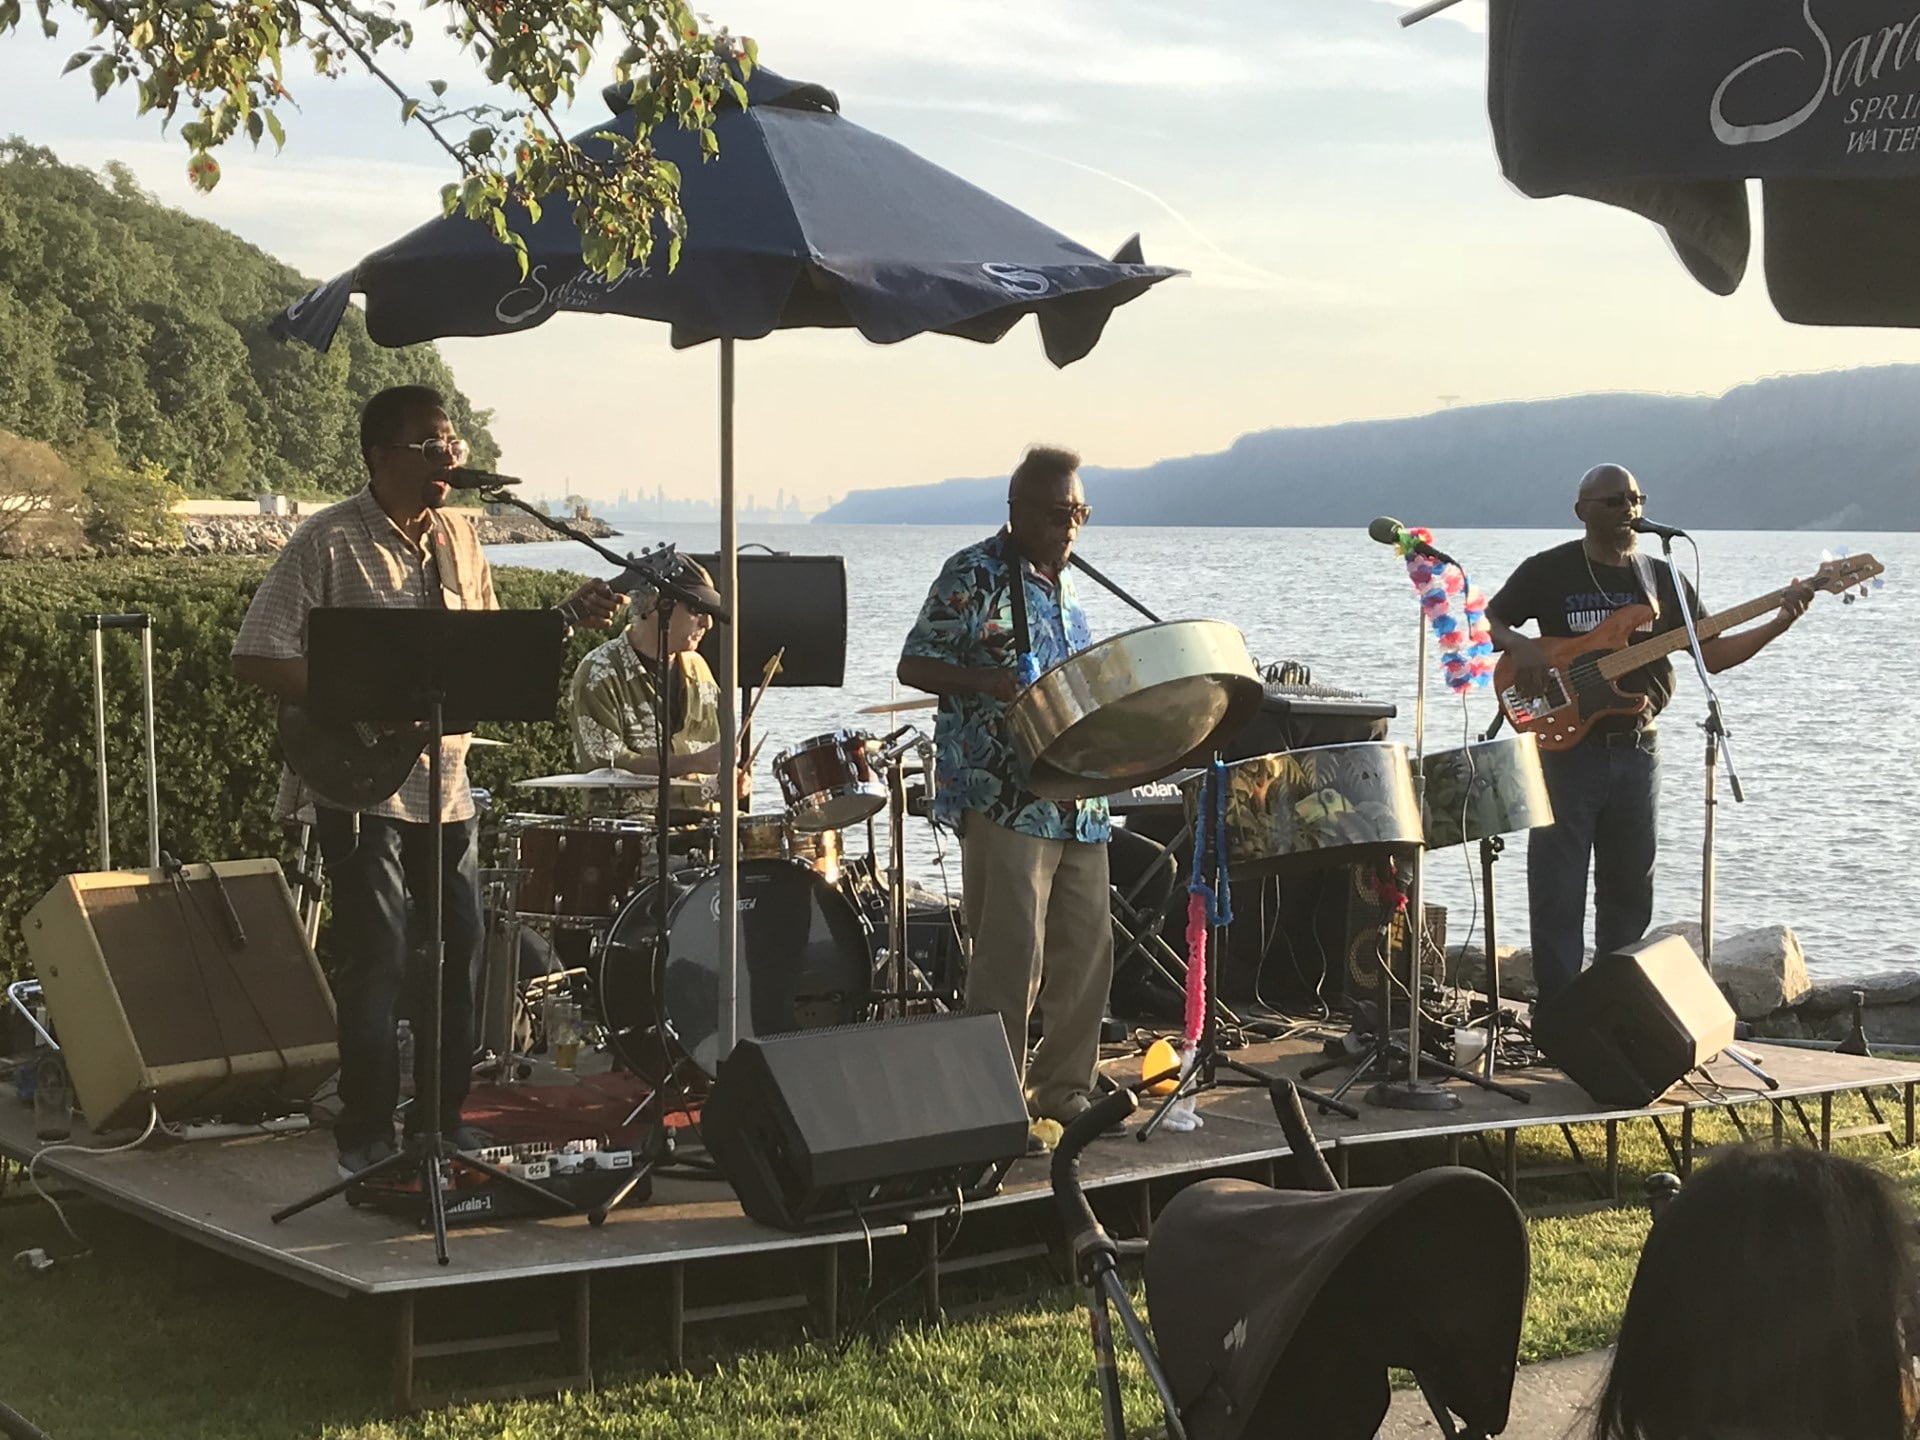 Caribbean Island Sound Band playing outside along the Hudson River